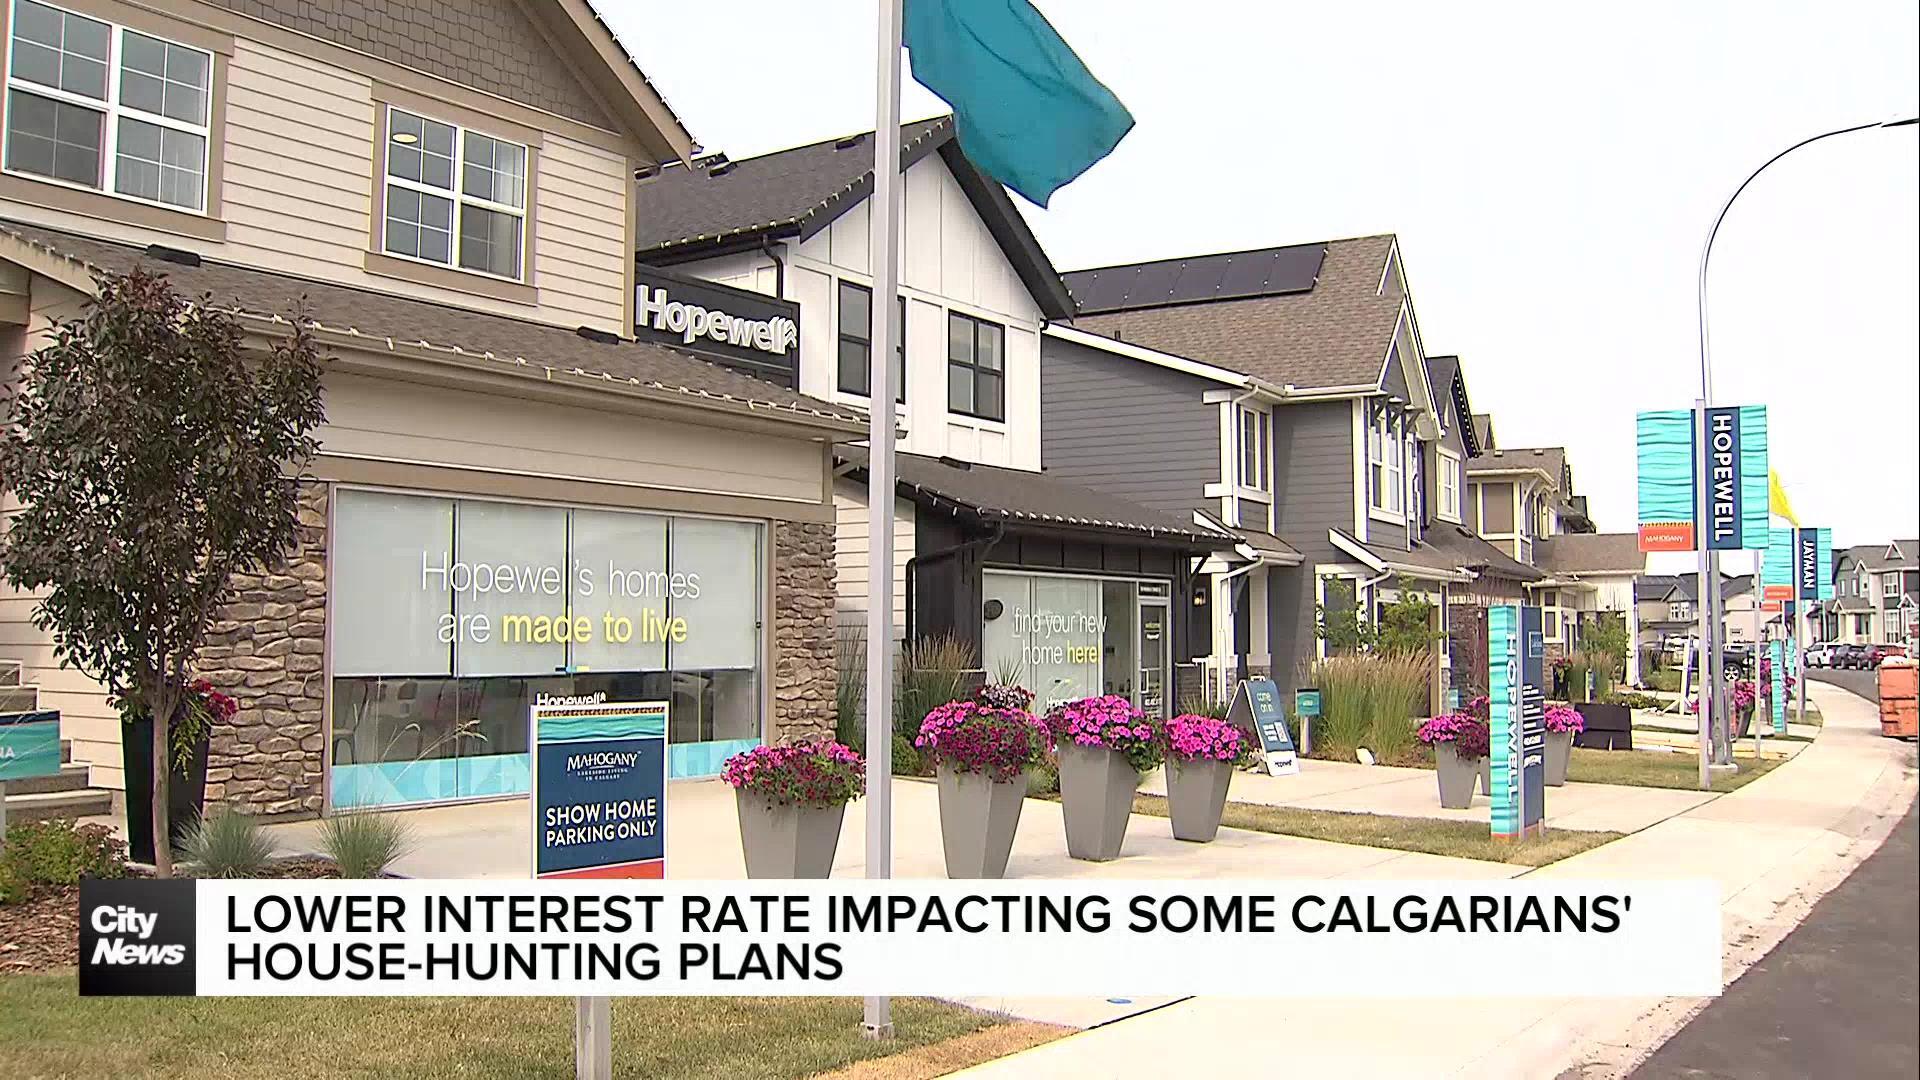 Lower interest rate impacting some Calgarians’ house-hunting plans